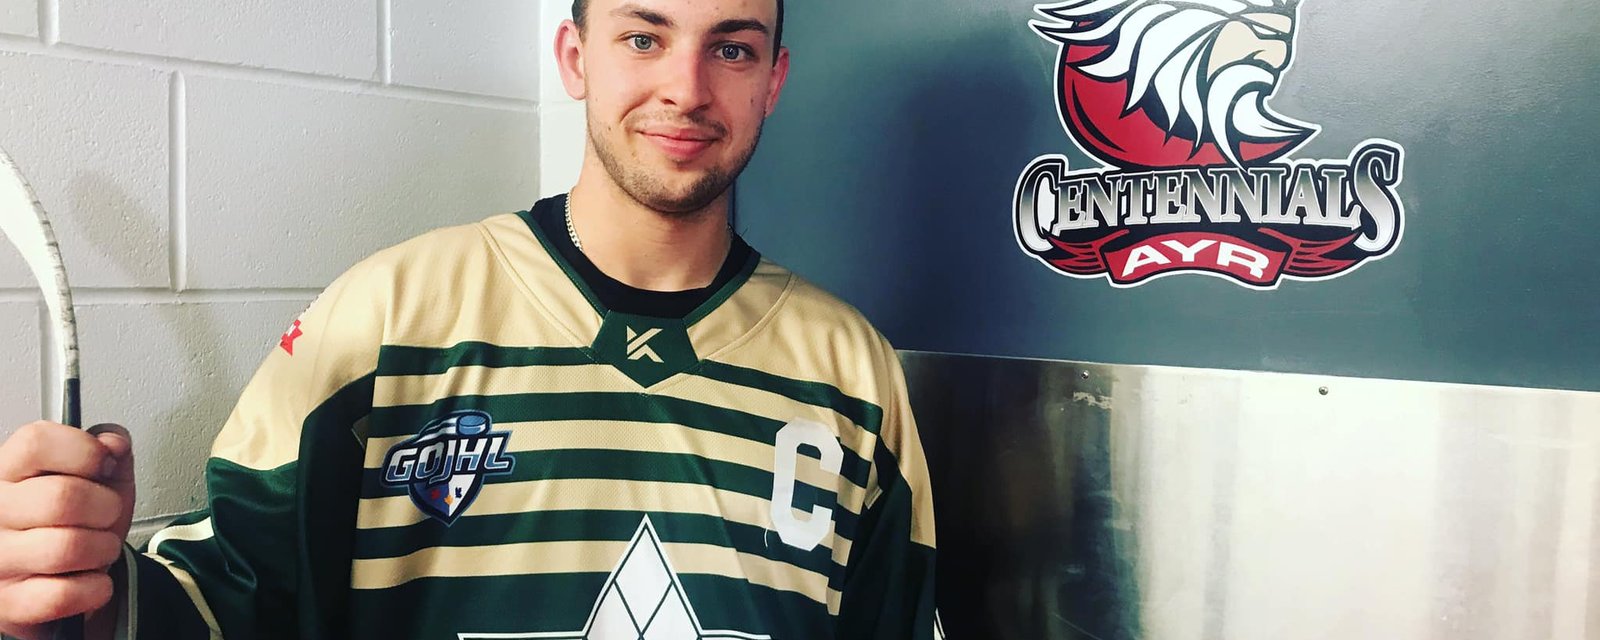 20-year-old team captain dies at rink during hockey tournament in GOJHL